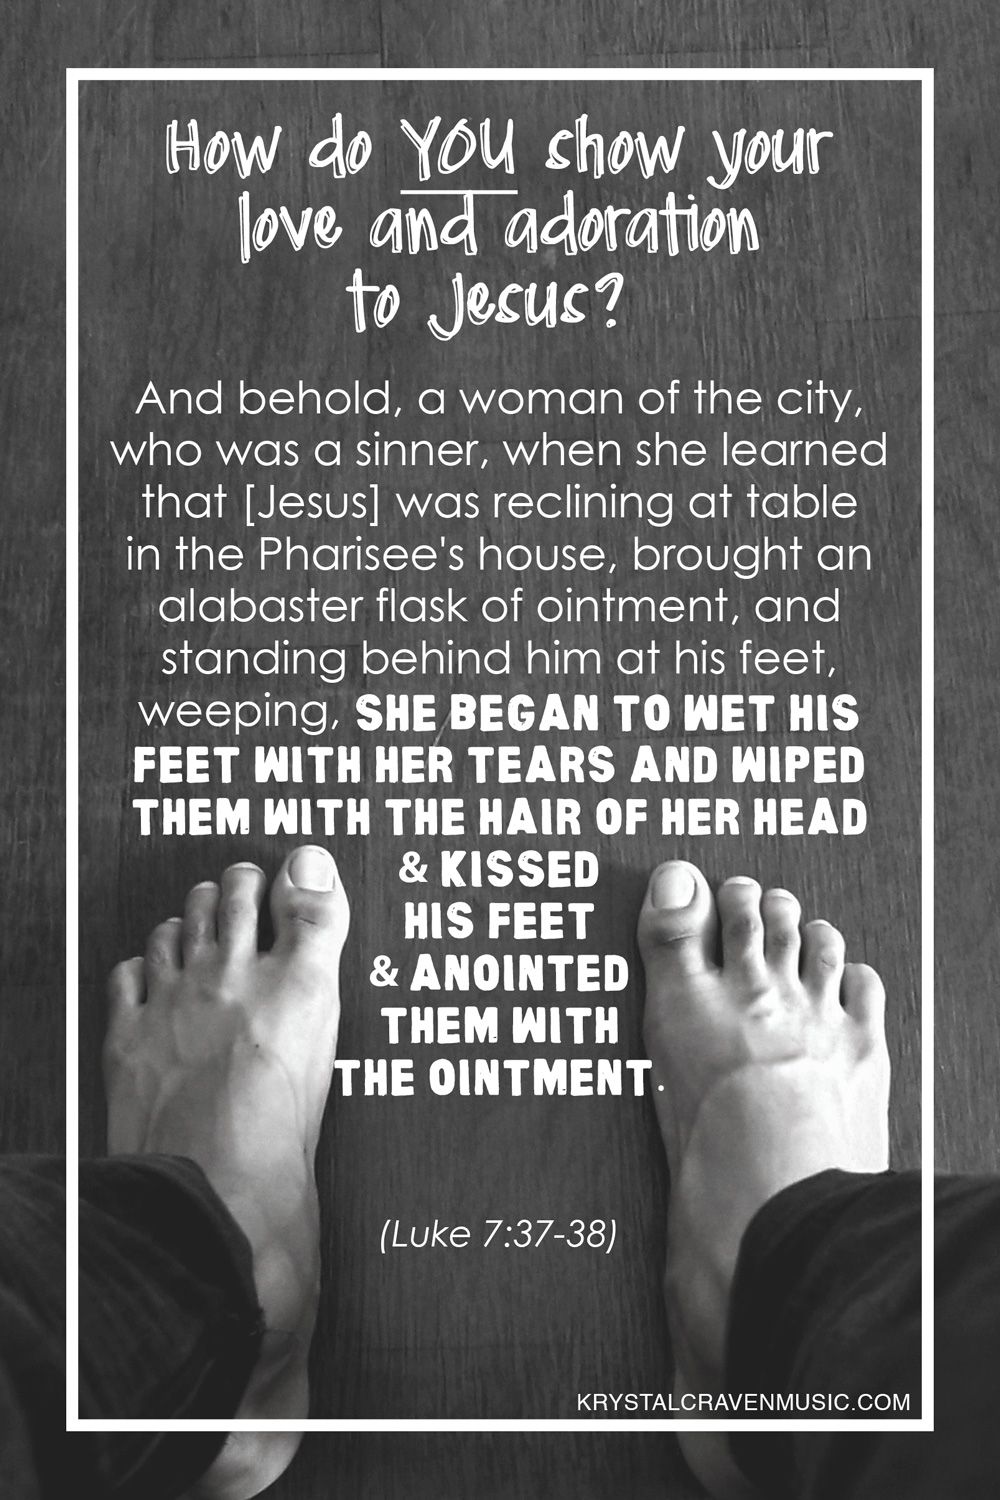 The text title of "How do You show your love and adoration to Jesus?" with the bible verse Luke 7:37-38 text, "And behold, a woman of the city, who was a sinner, when she learned that [Jesus] was reclining at table in the Pharisee's house, brought an alabaster flask of ointment, and standing behind him at his feet, weeping, she bagin to wet his feet with her tears and wiped them with the hair of her head and kissed his feet and anointed them with the ointment." overlaying a black and white picture of bare feet standing on wood floor.